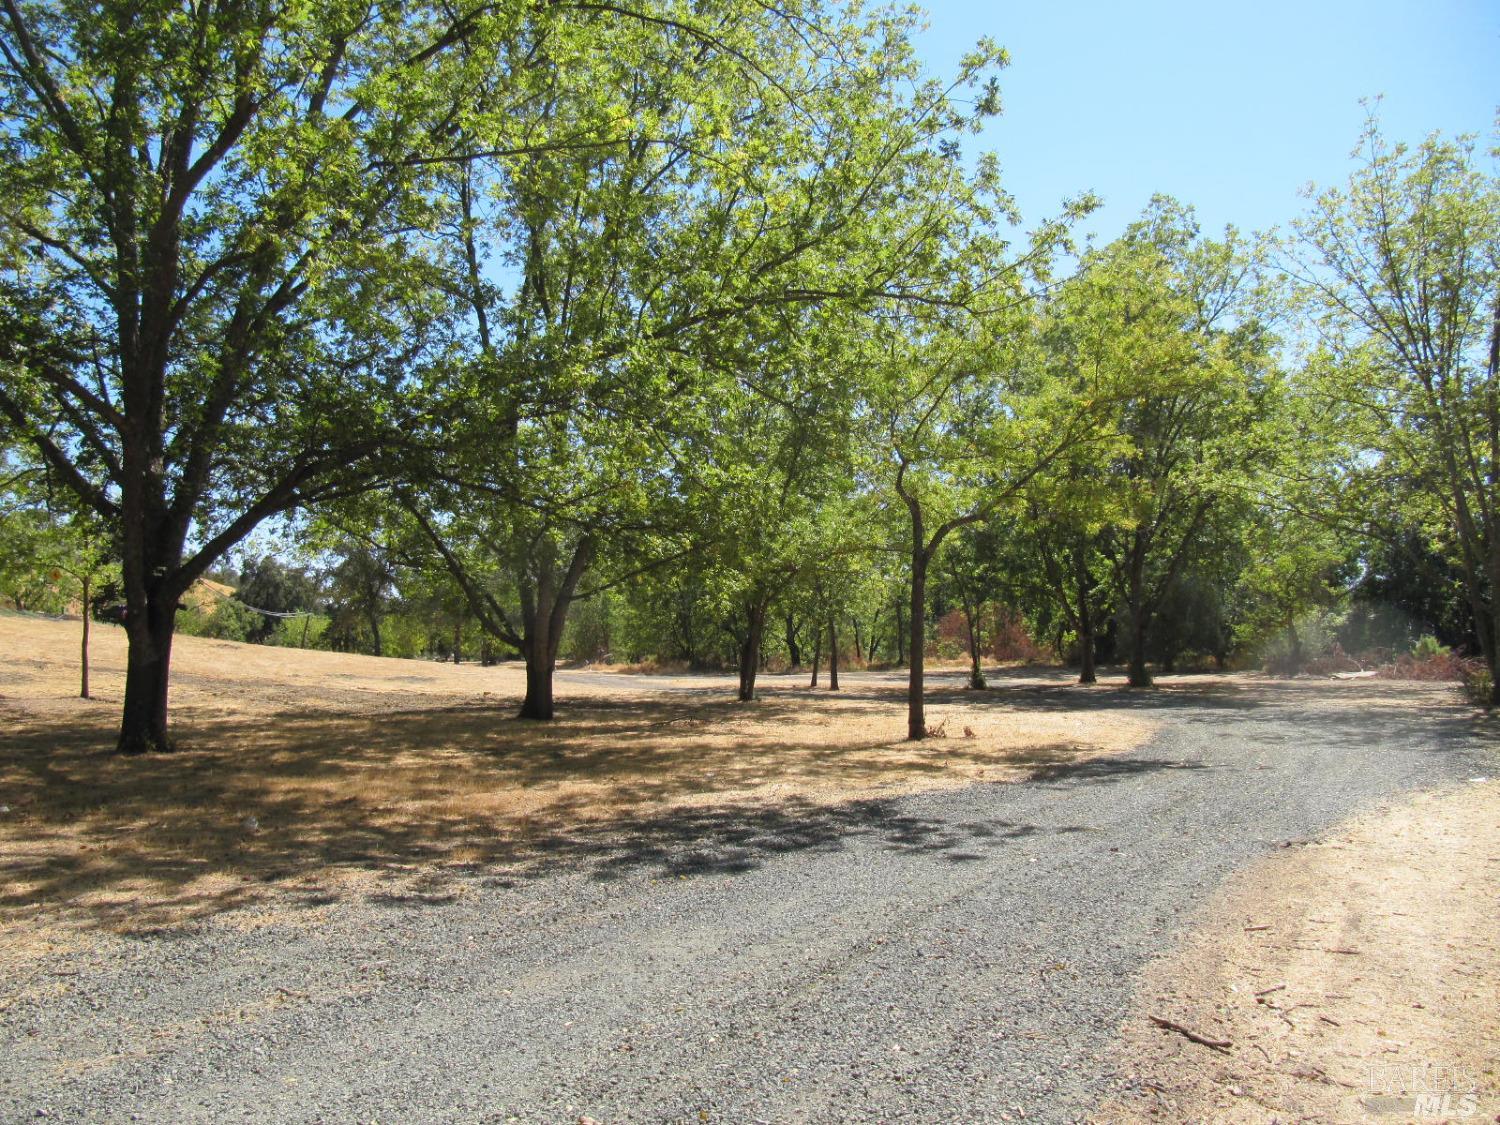 Photo of Gibson Canyon Rd in Vacaville, CA